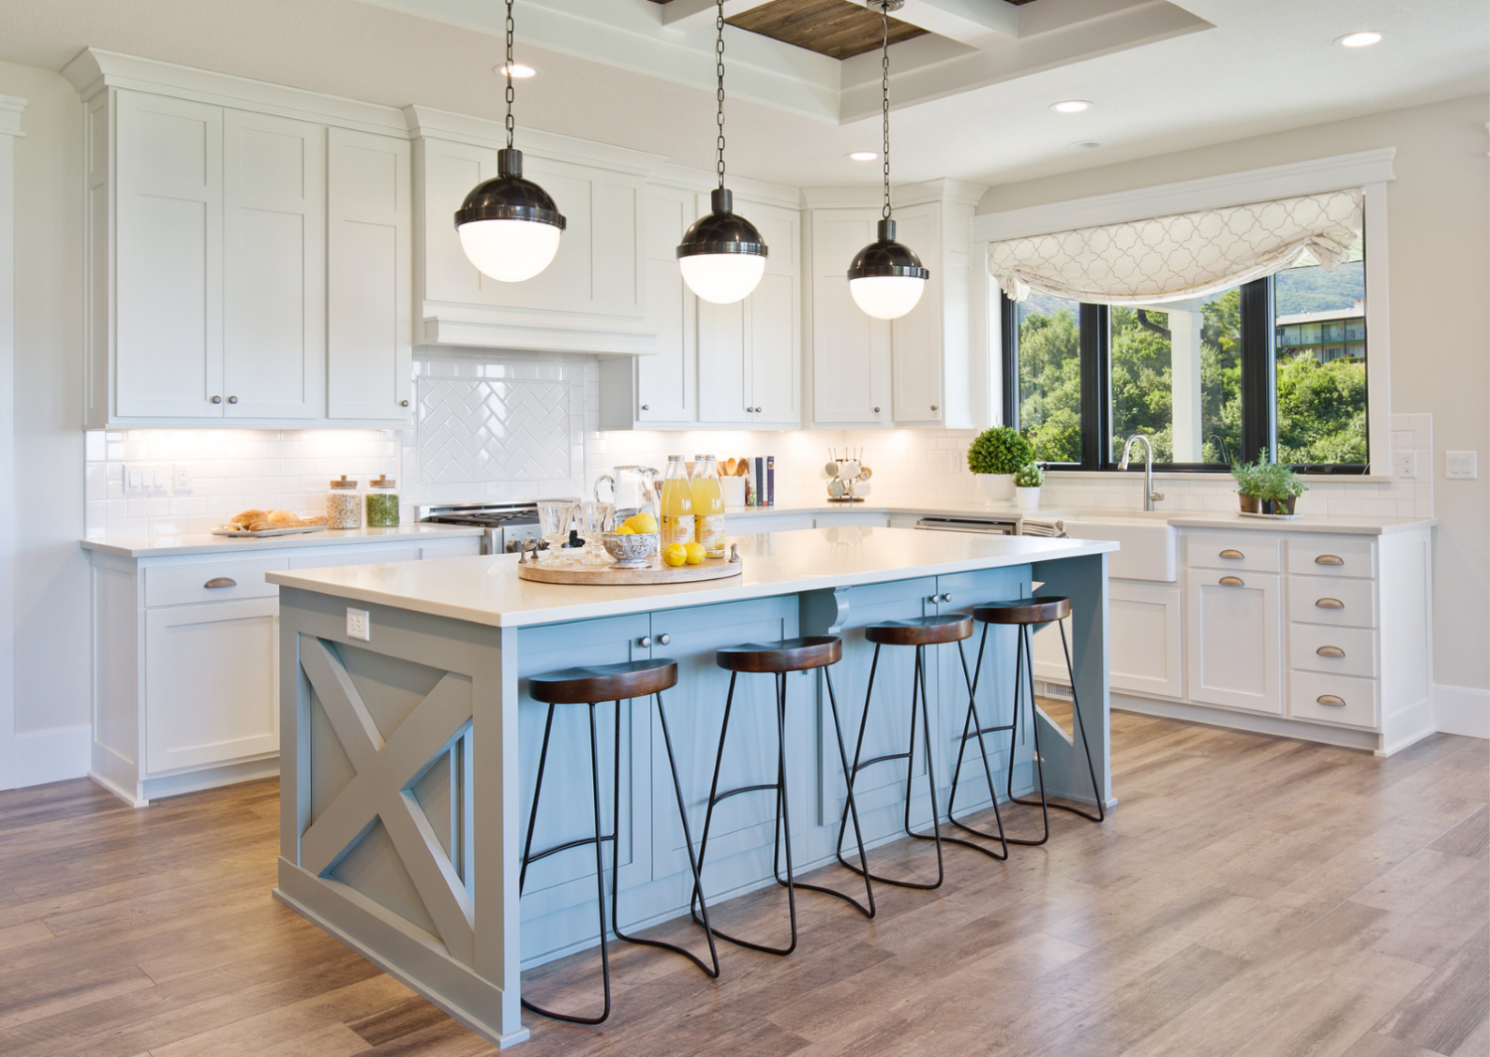 10 Classic Kitchen Colour Schemes For 2021 And Beyond – Insite Interiors